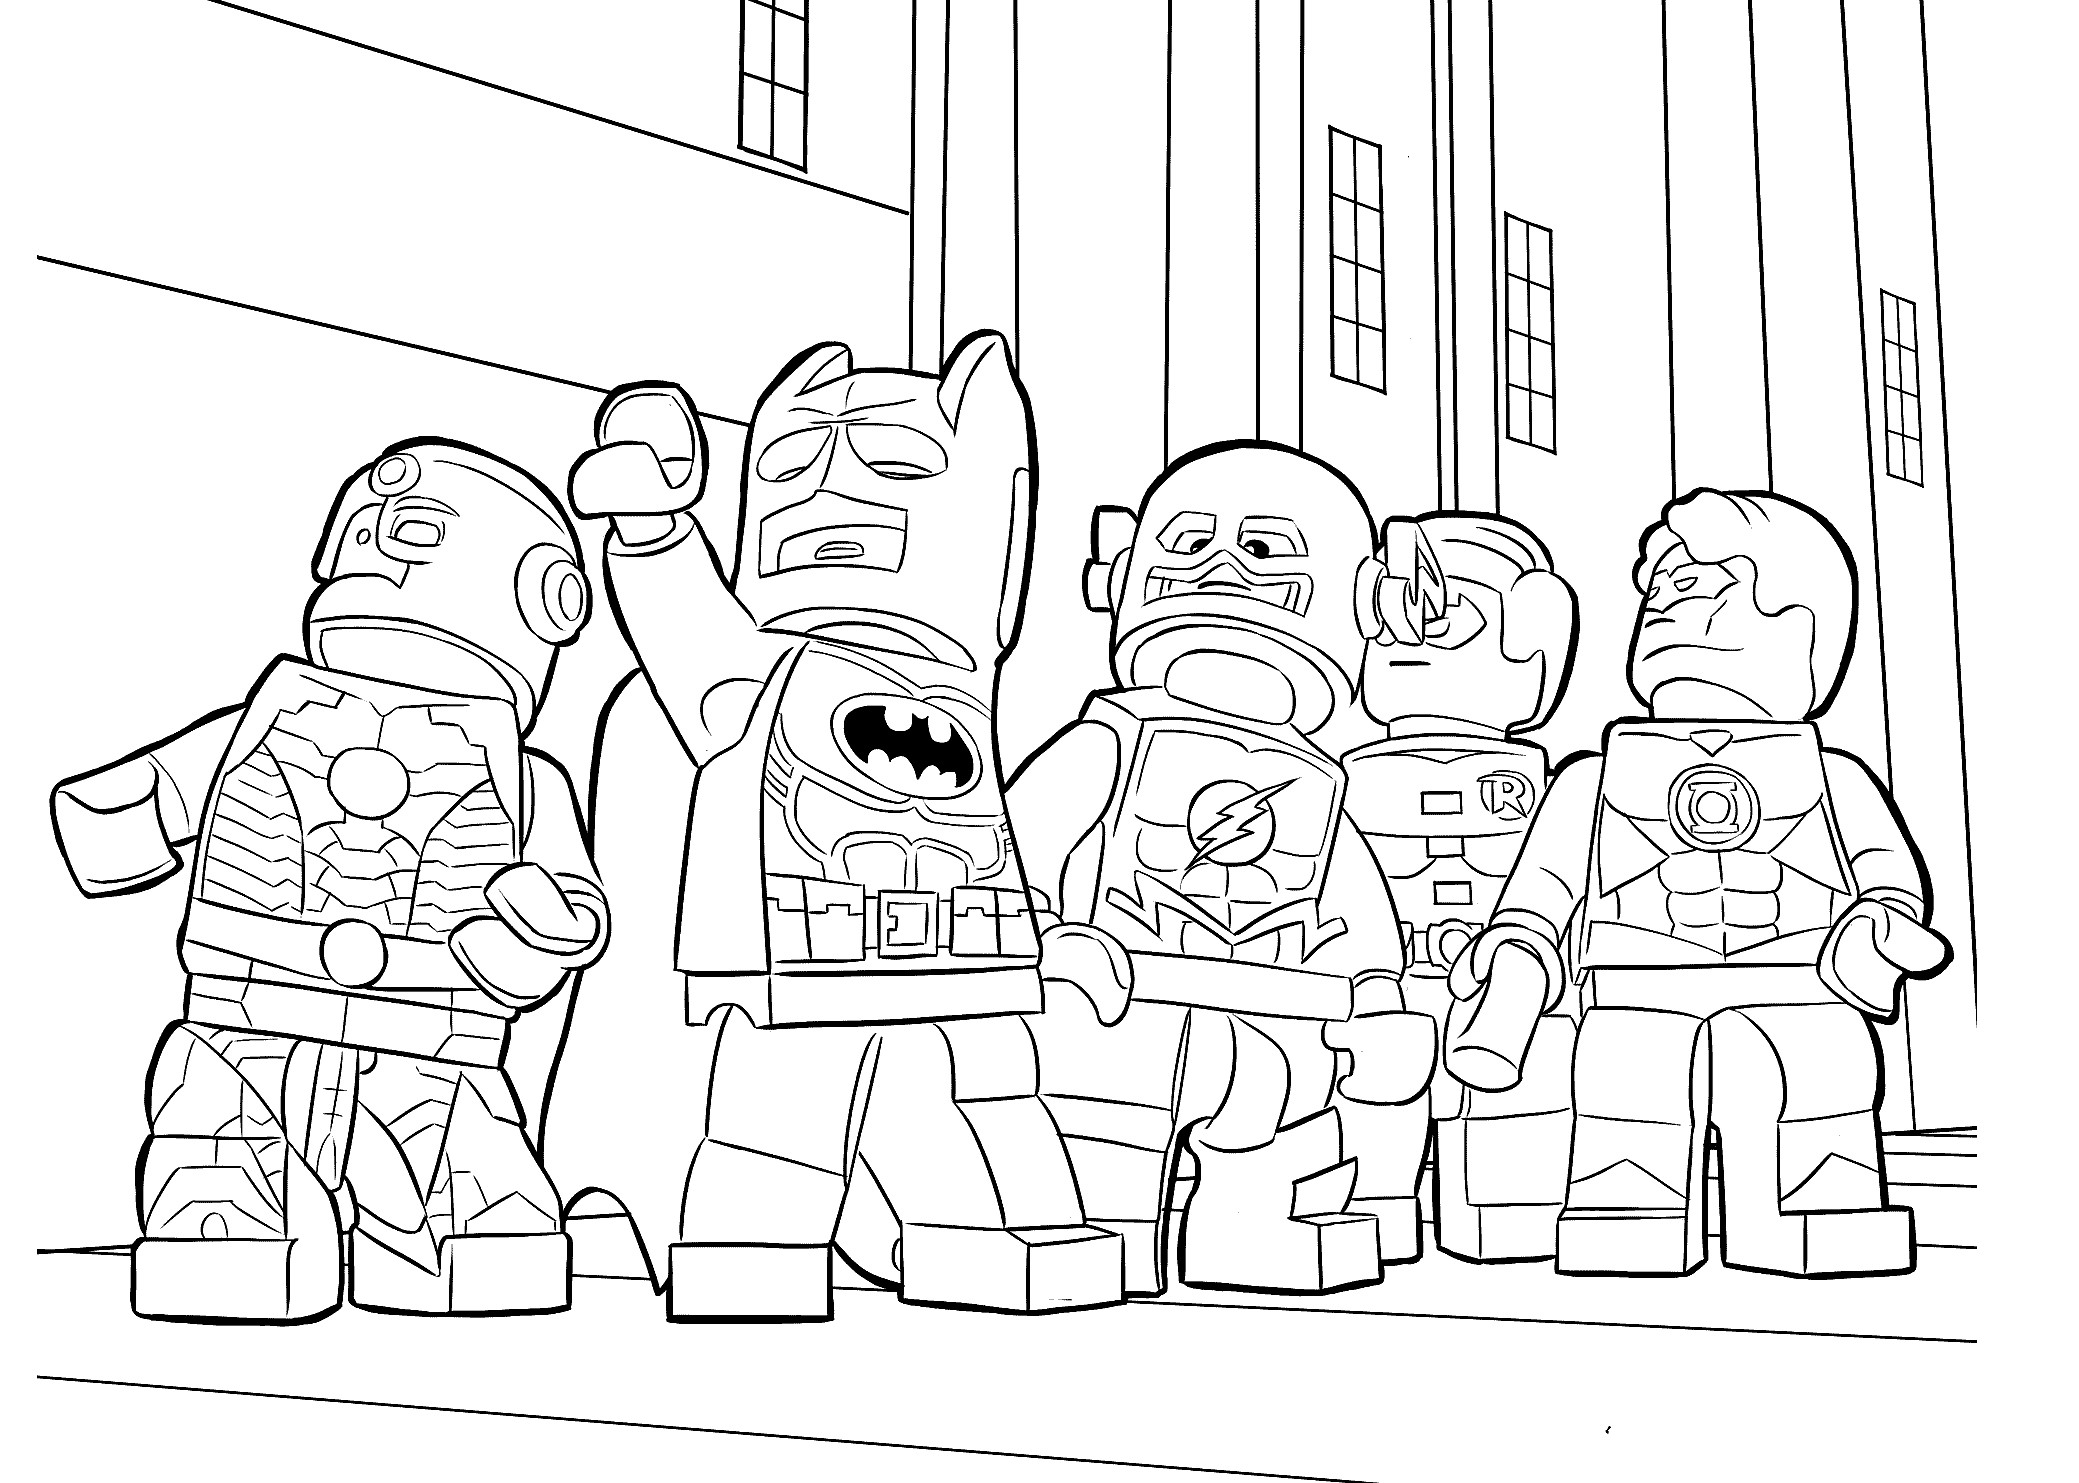 Coloring Pages Of Boys Printable
 Lego heroes coloring page for boys printable free Lego